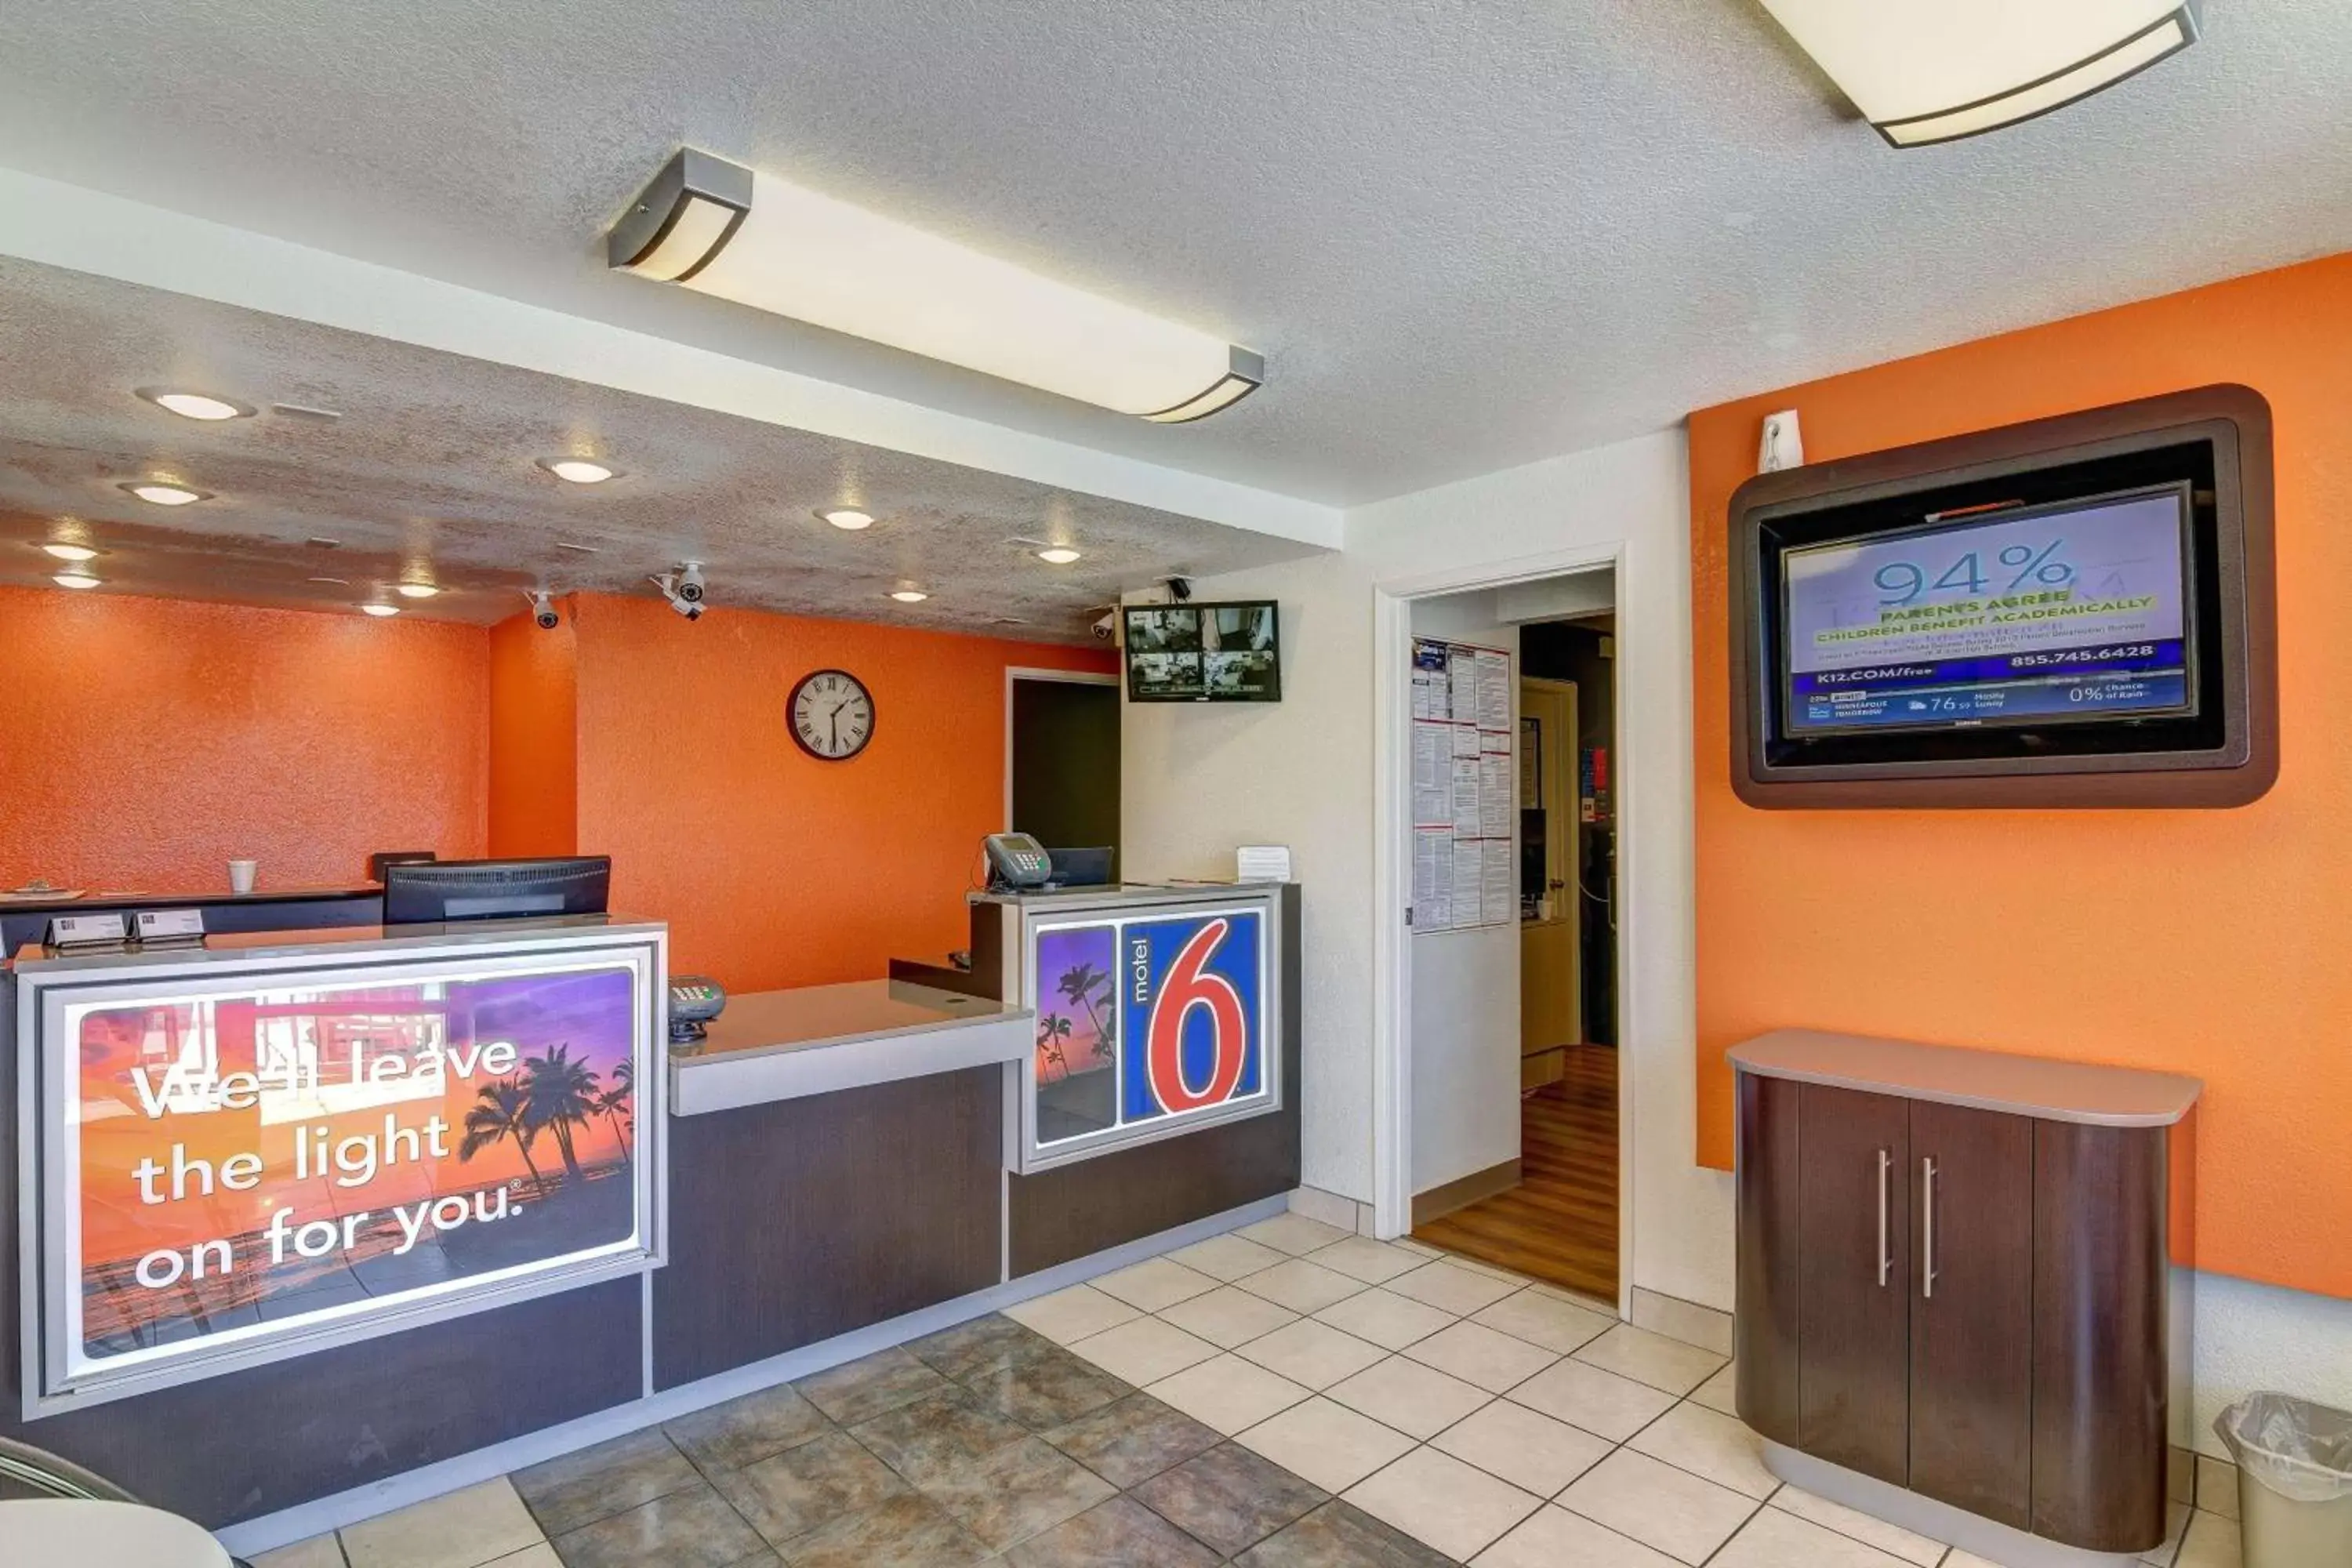 TV and multimedia, Lobby/Reception in Motel 6-Simi Valley, CA